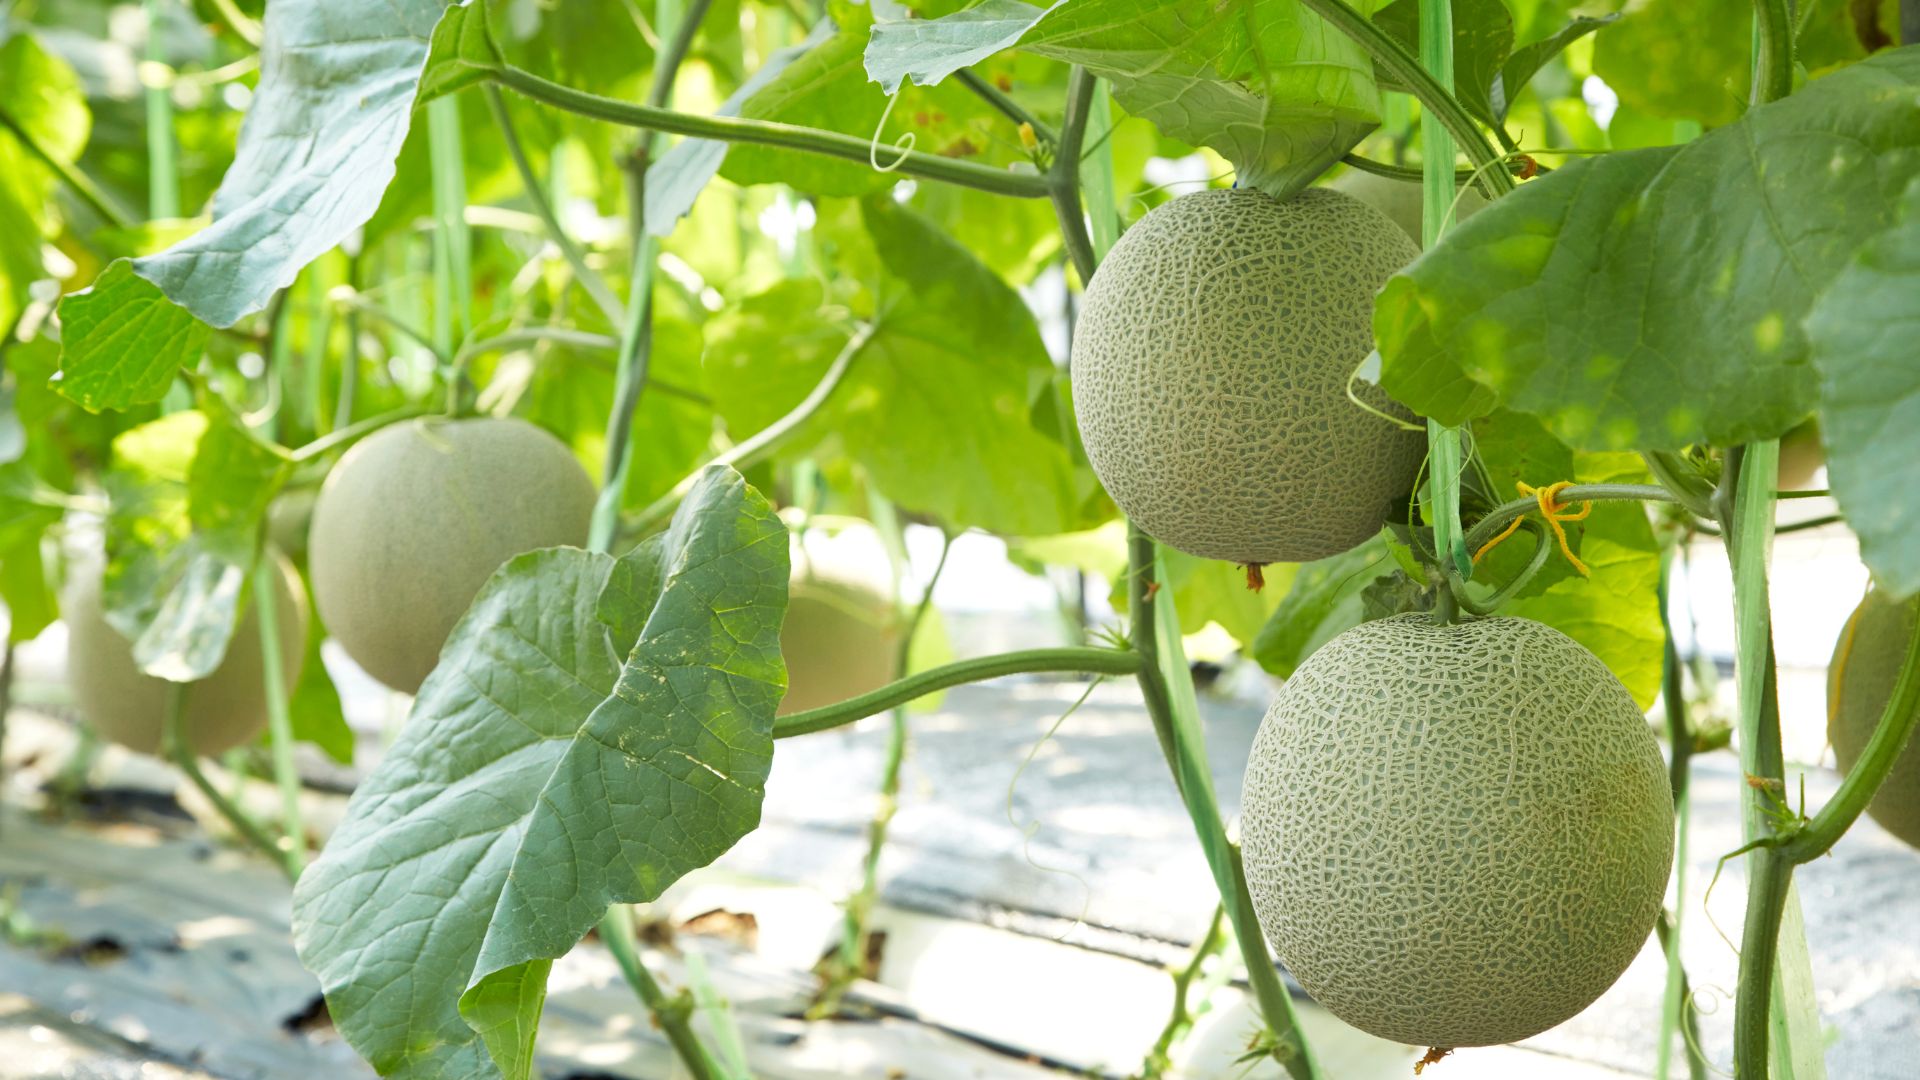 Follow These 7 Easy Steps To Homegrown Melons and Enjoy The Fruits Of Your Labor